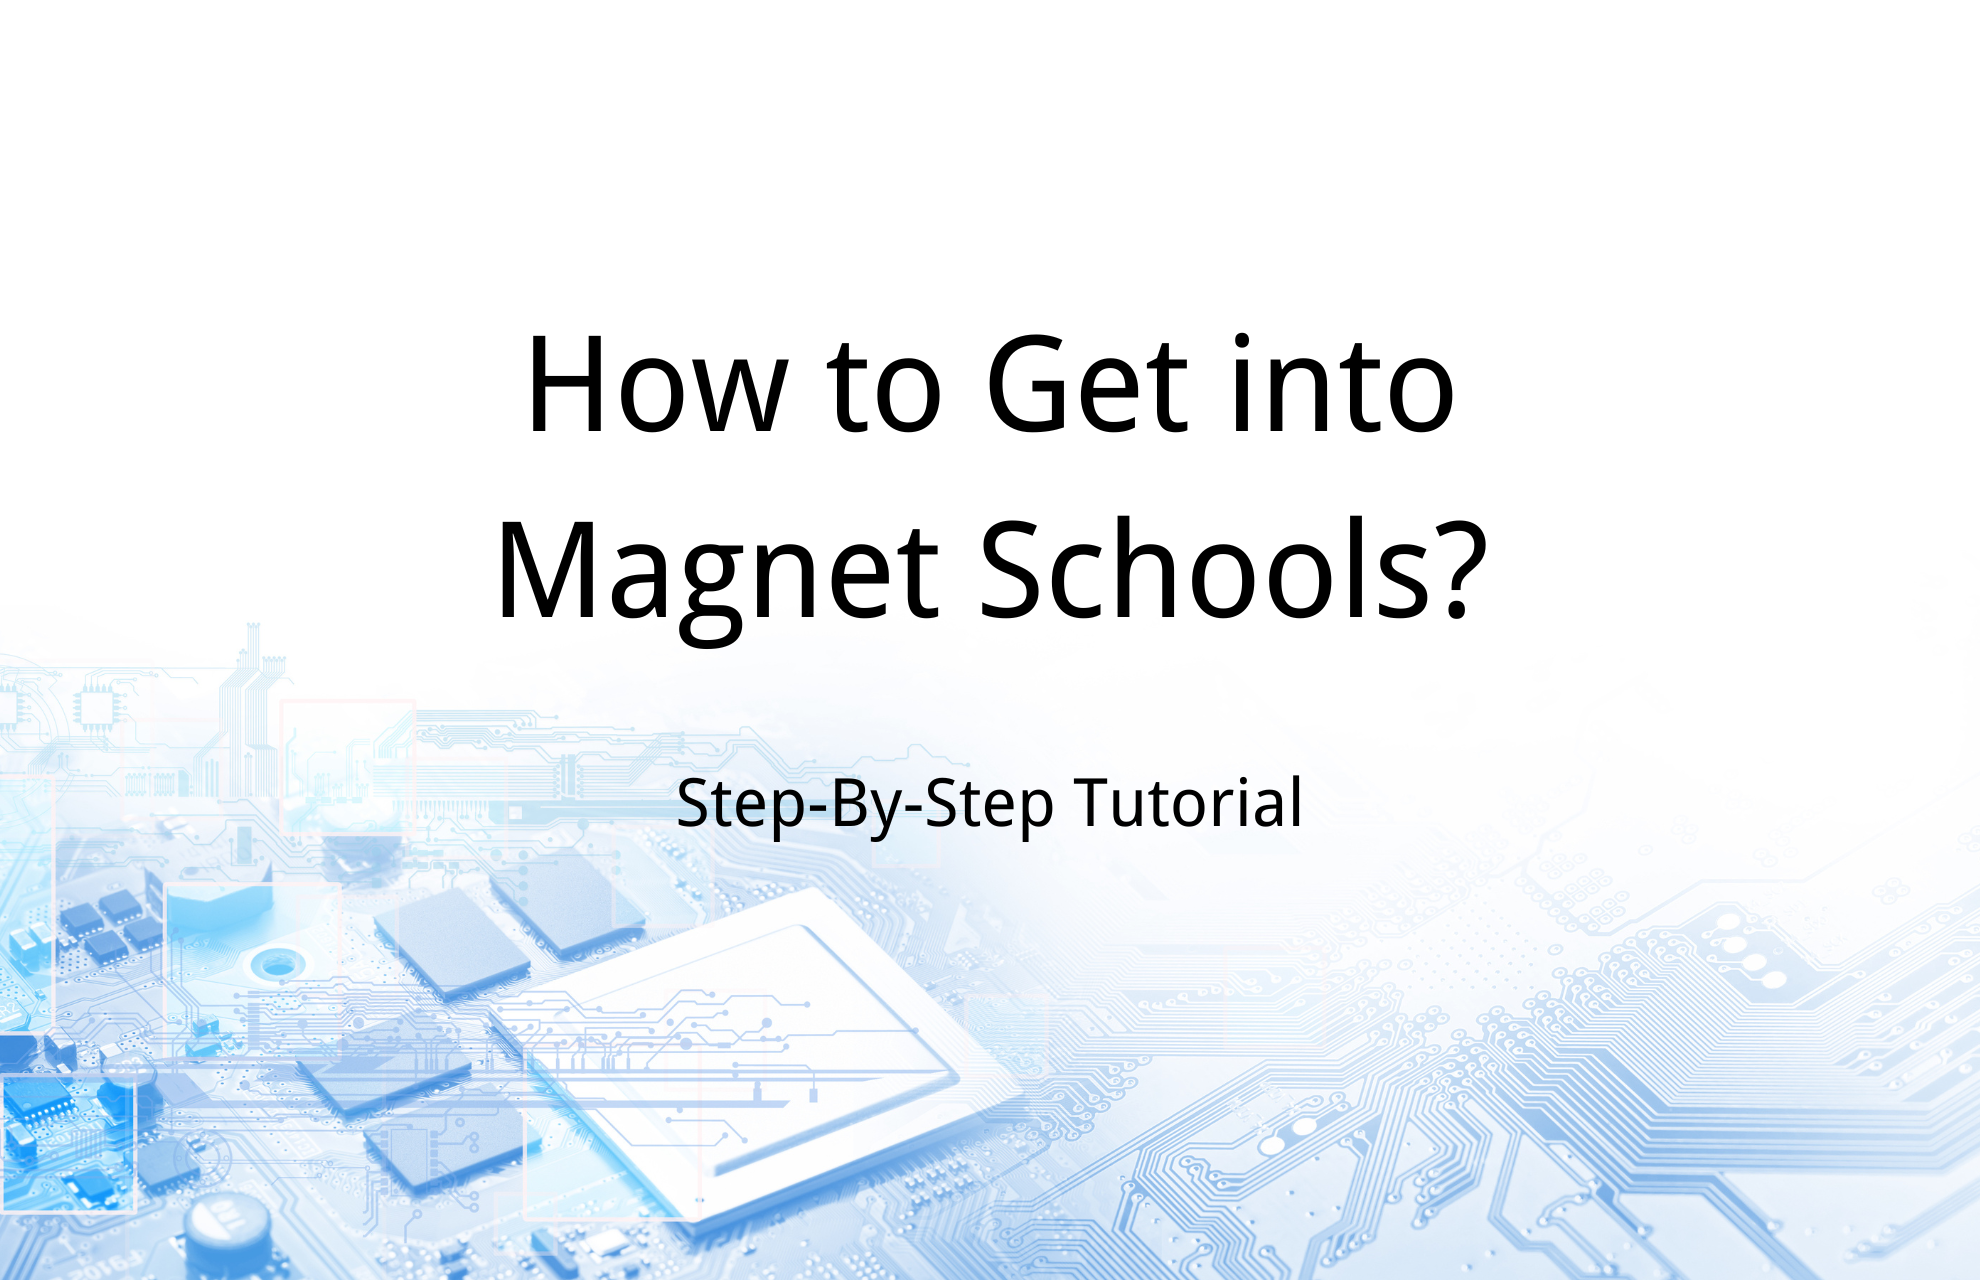 How to Get into Magnet Schools? Step-By-Step Tutorial